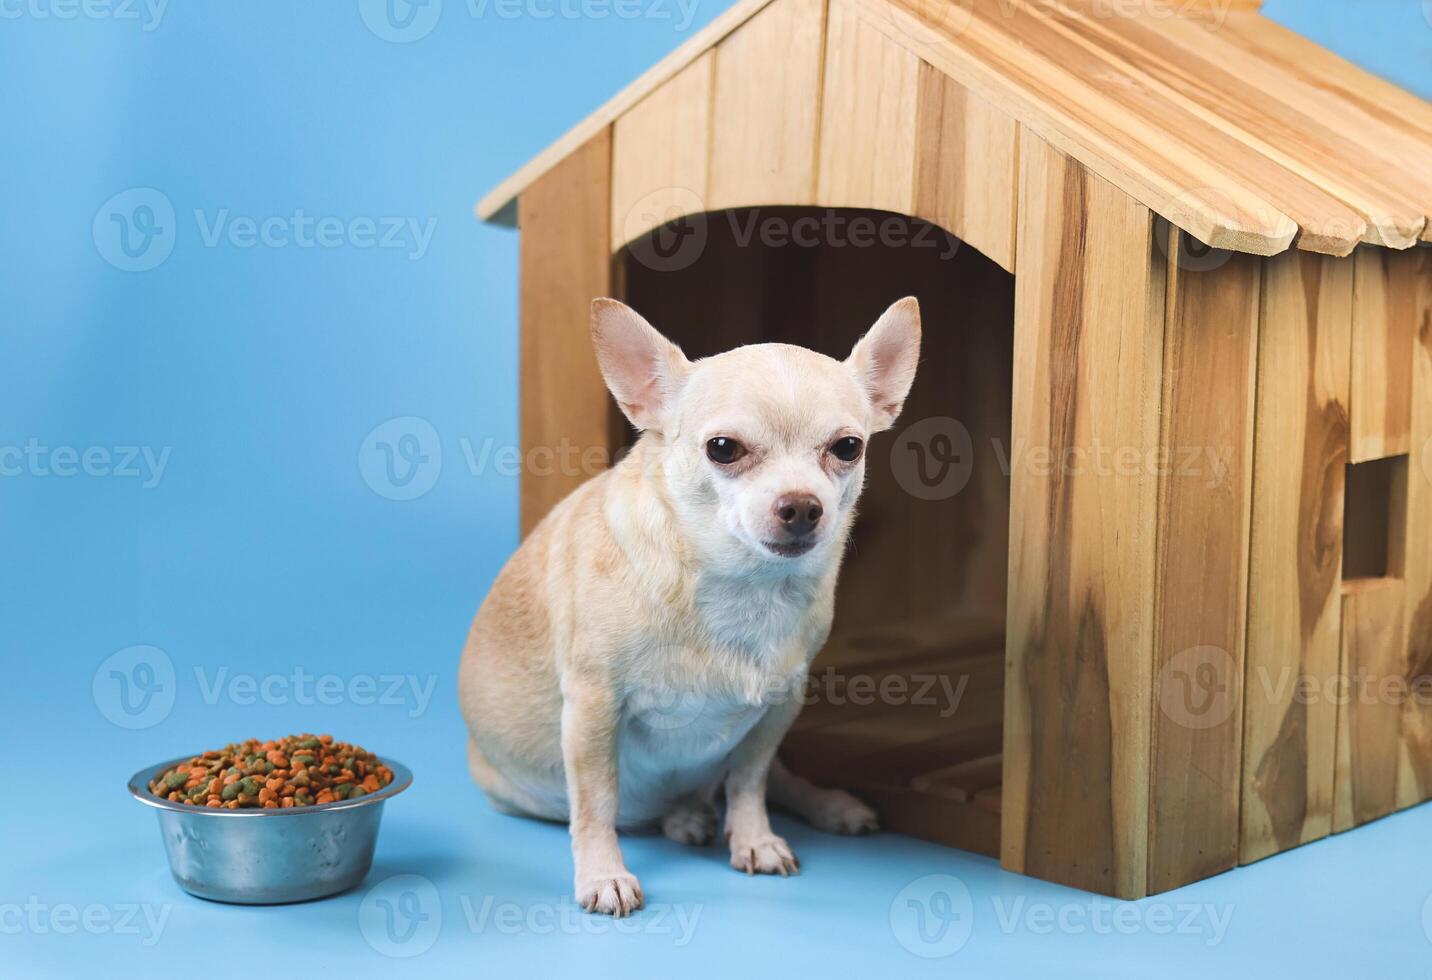 brown  short hair  Chihuahua dog sitting in  front of wooden dog house with food bowl, looking at camera, isolated on blue background. photo